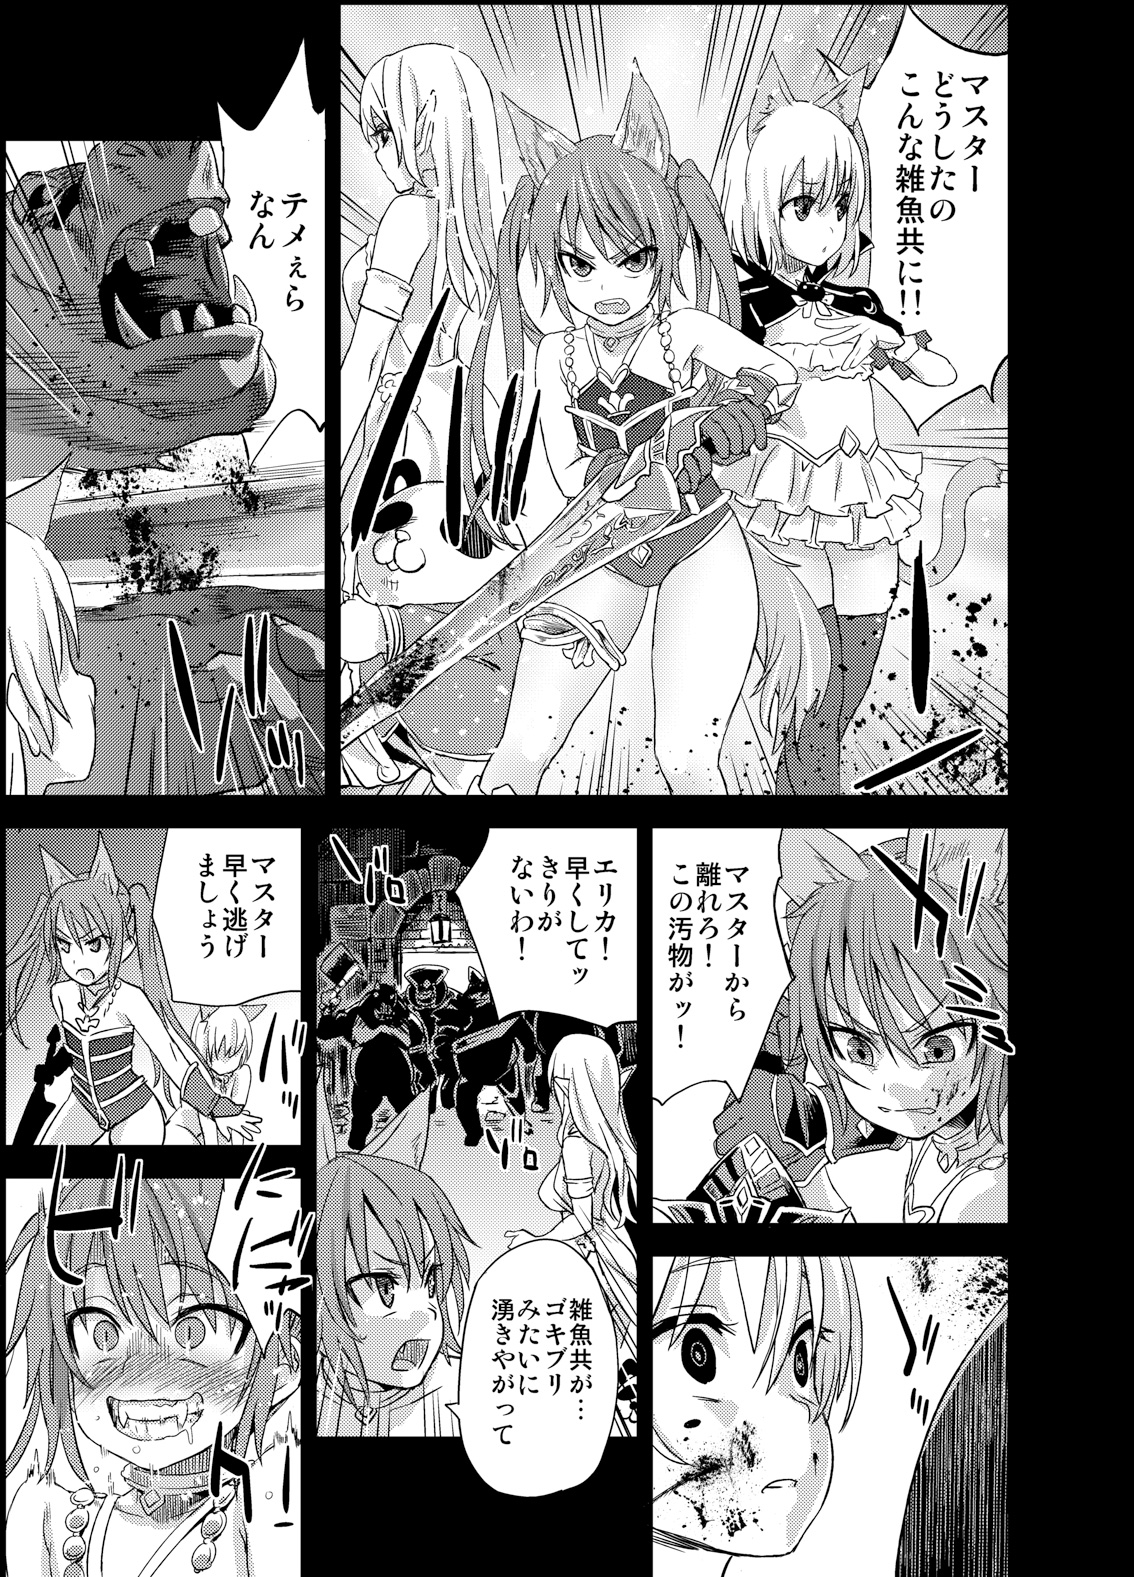 [Fatalpulse (Asanagi)] Victim Girls 12 Another one Bites the Dust (TERA The Exiled Realm of Arborea) [Digital] page 20 full